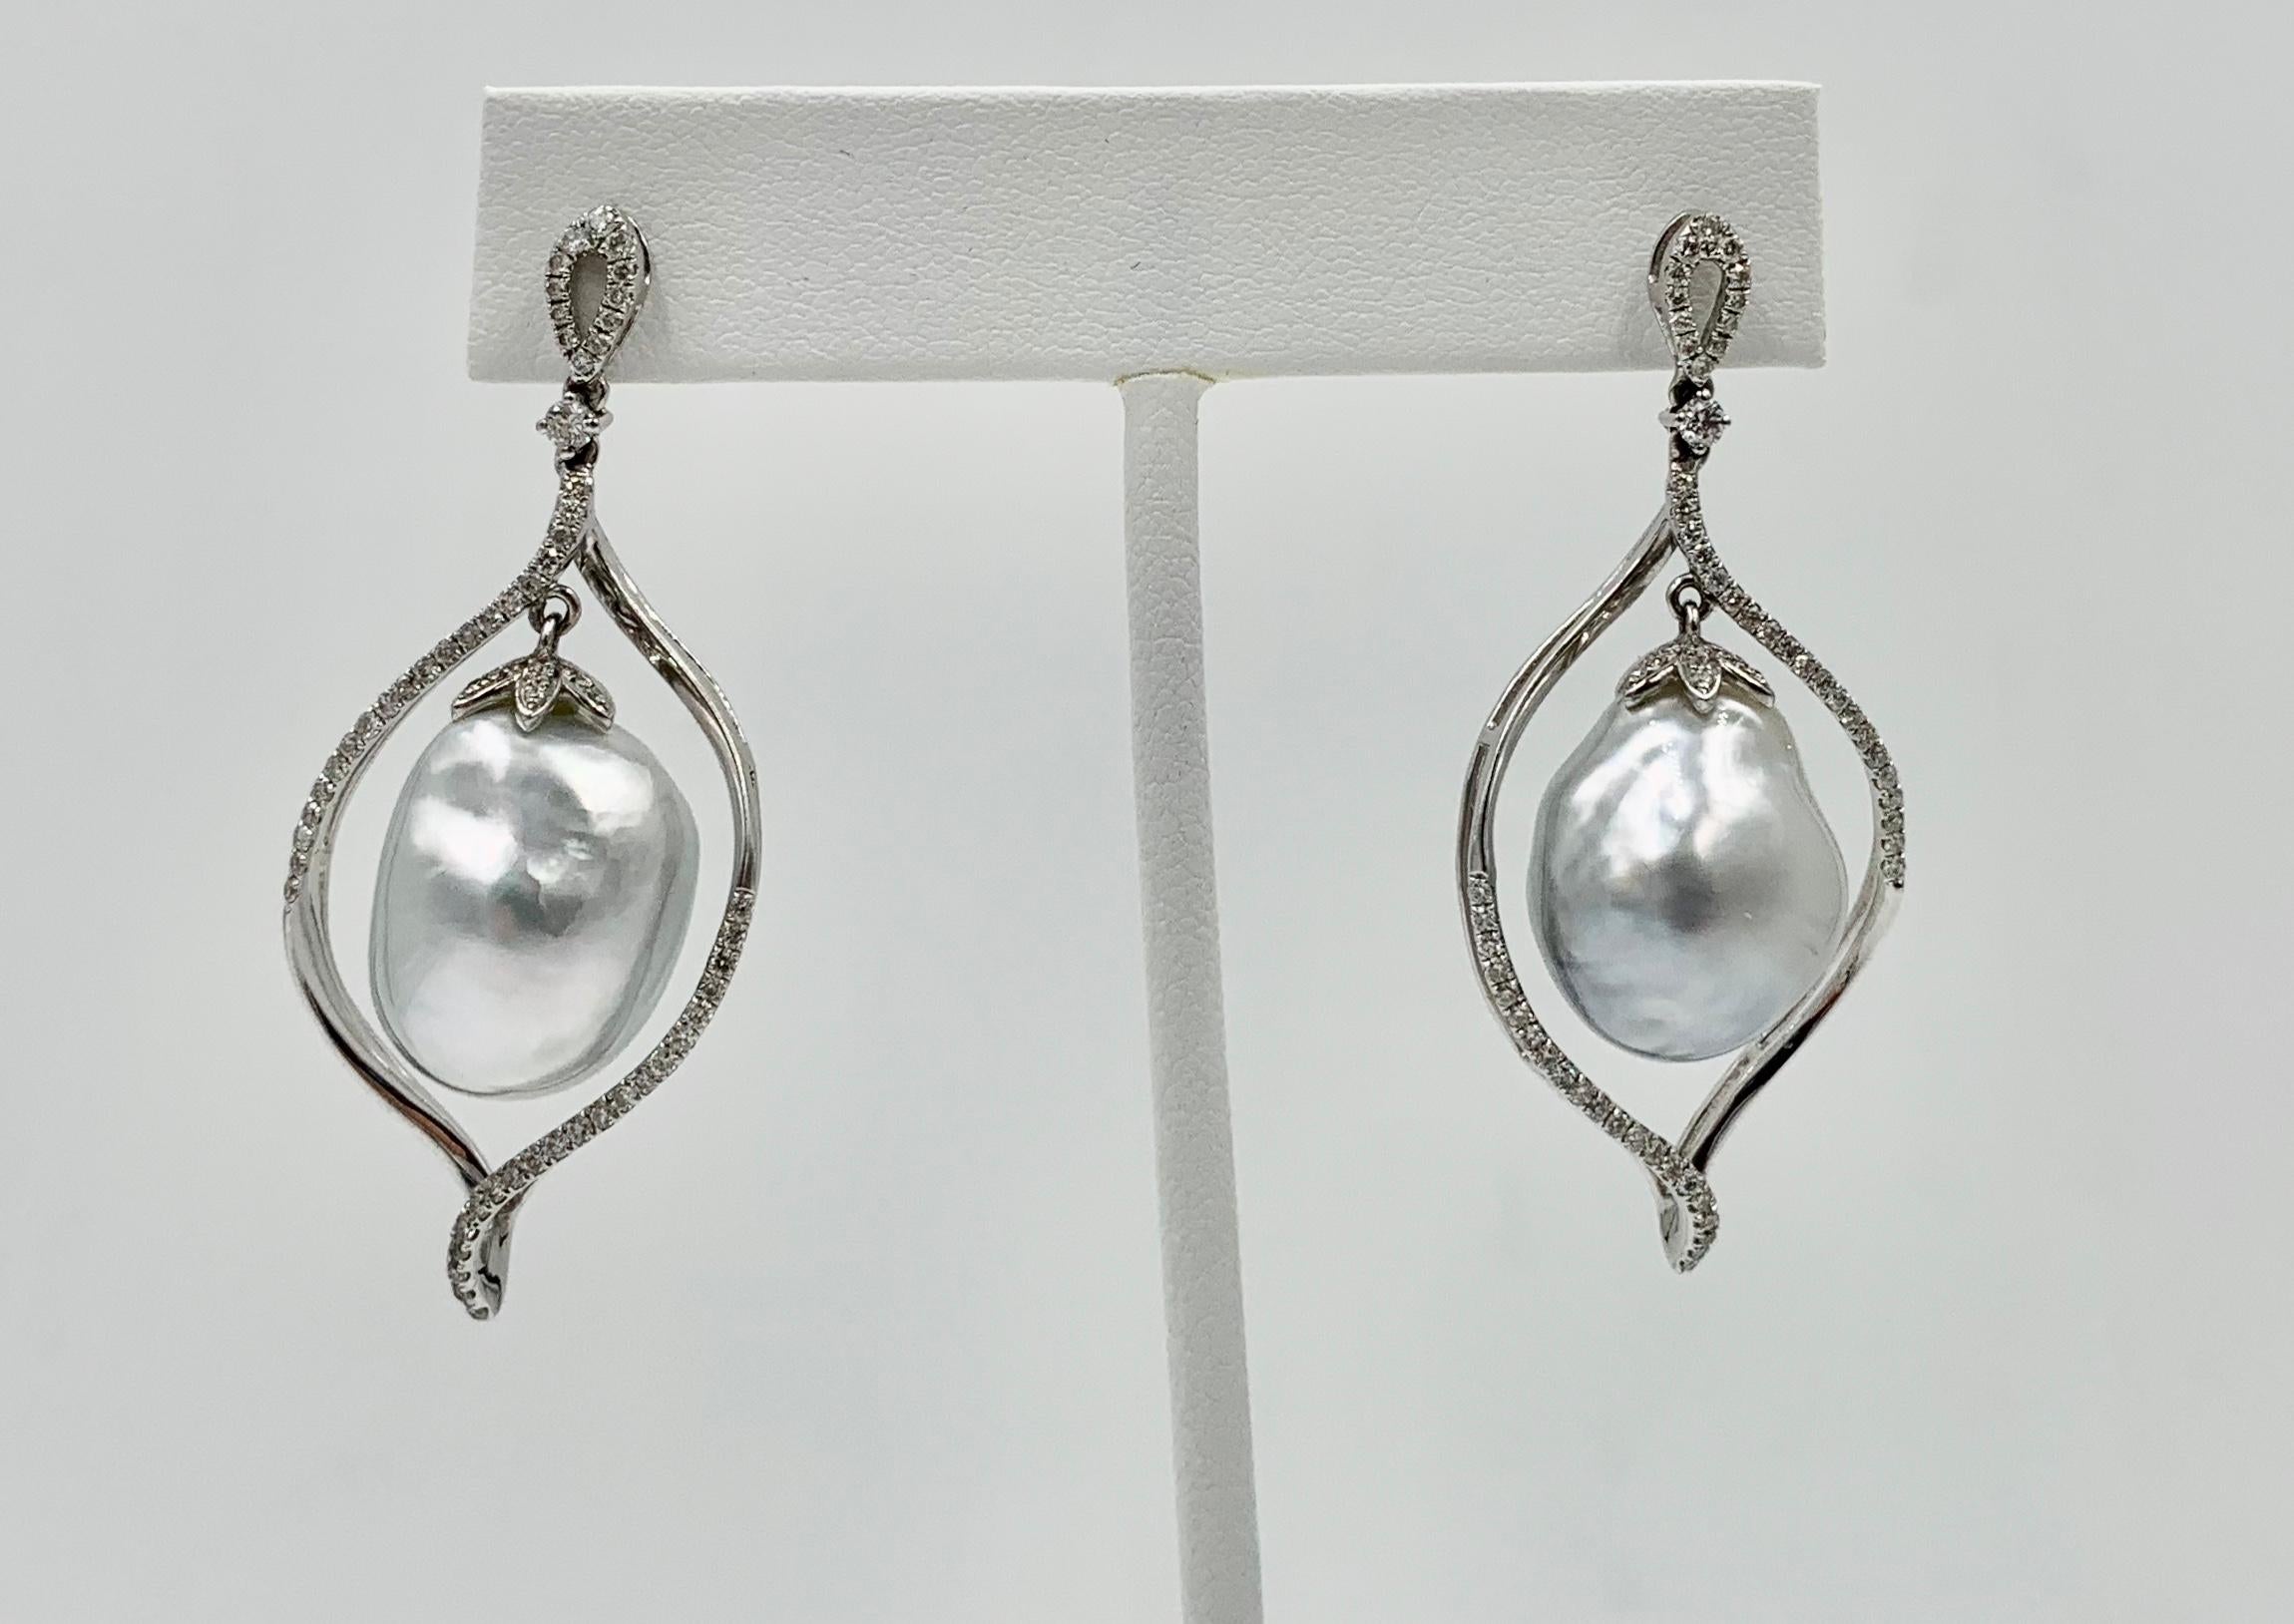 A magnificent pair of South Sea Pearl Diamond Dangle Drop Earrings with spectacular 18mm South Sea Pearls.  The impressive Pearls hang from a diamond set surround in 18 Karat White Gold.  There are a total of 126 sparkling white diamonds.  The